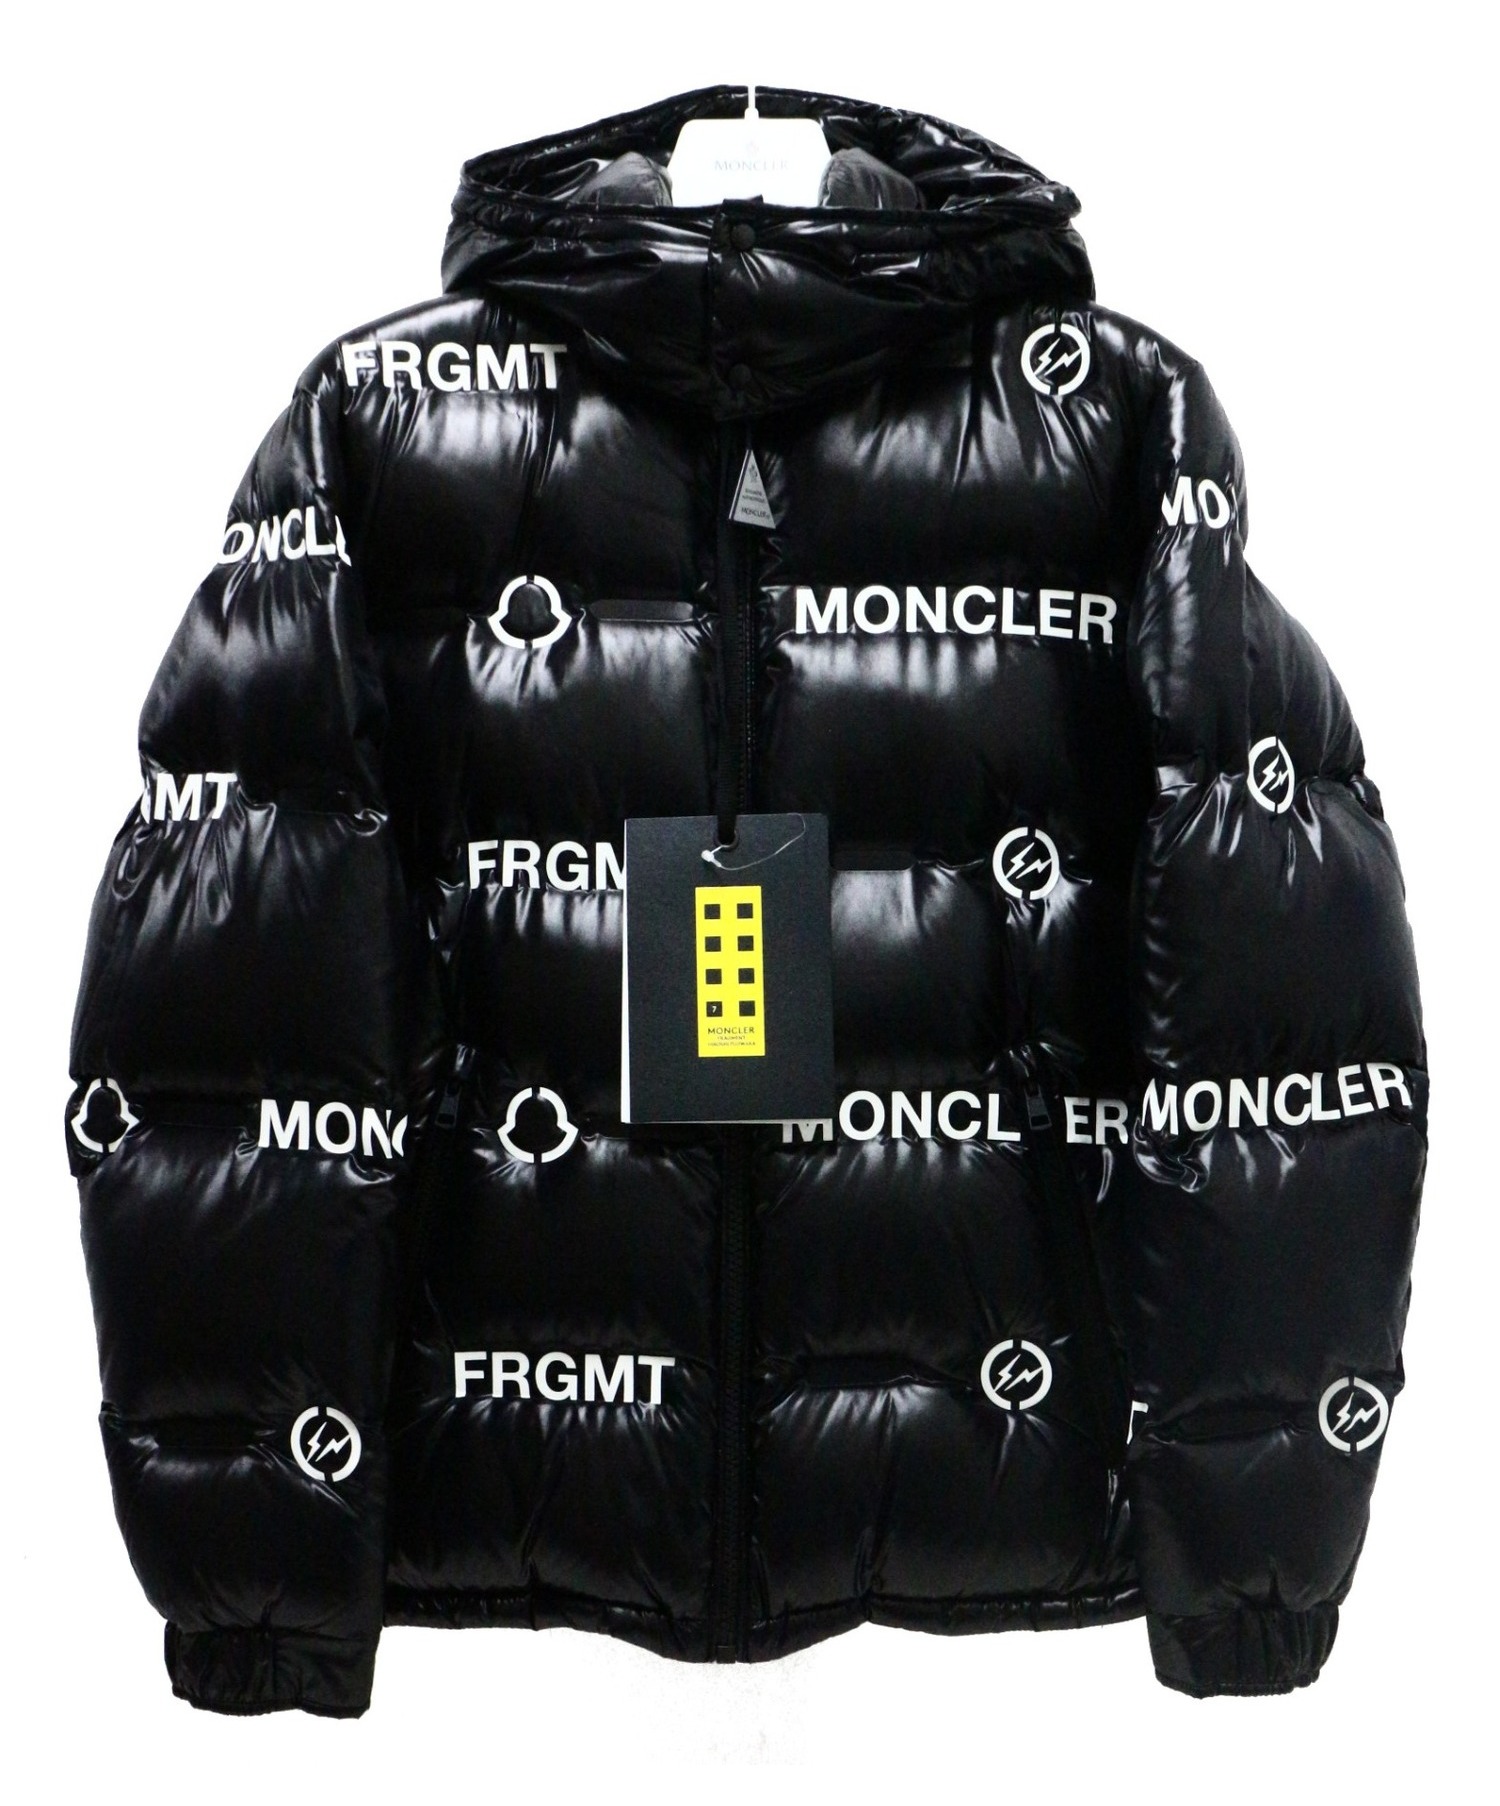 FRAGMENT - Converse Moncler Fragment モンクレール フラグメントの+